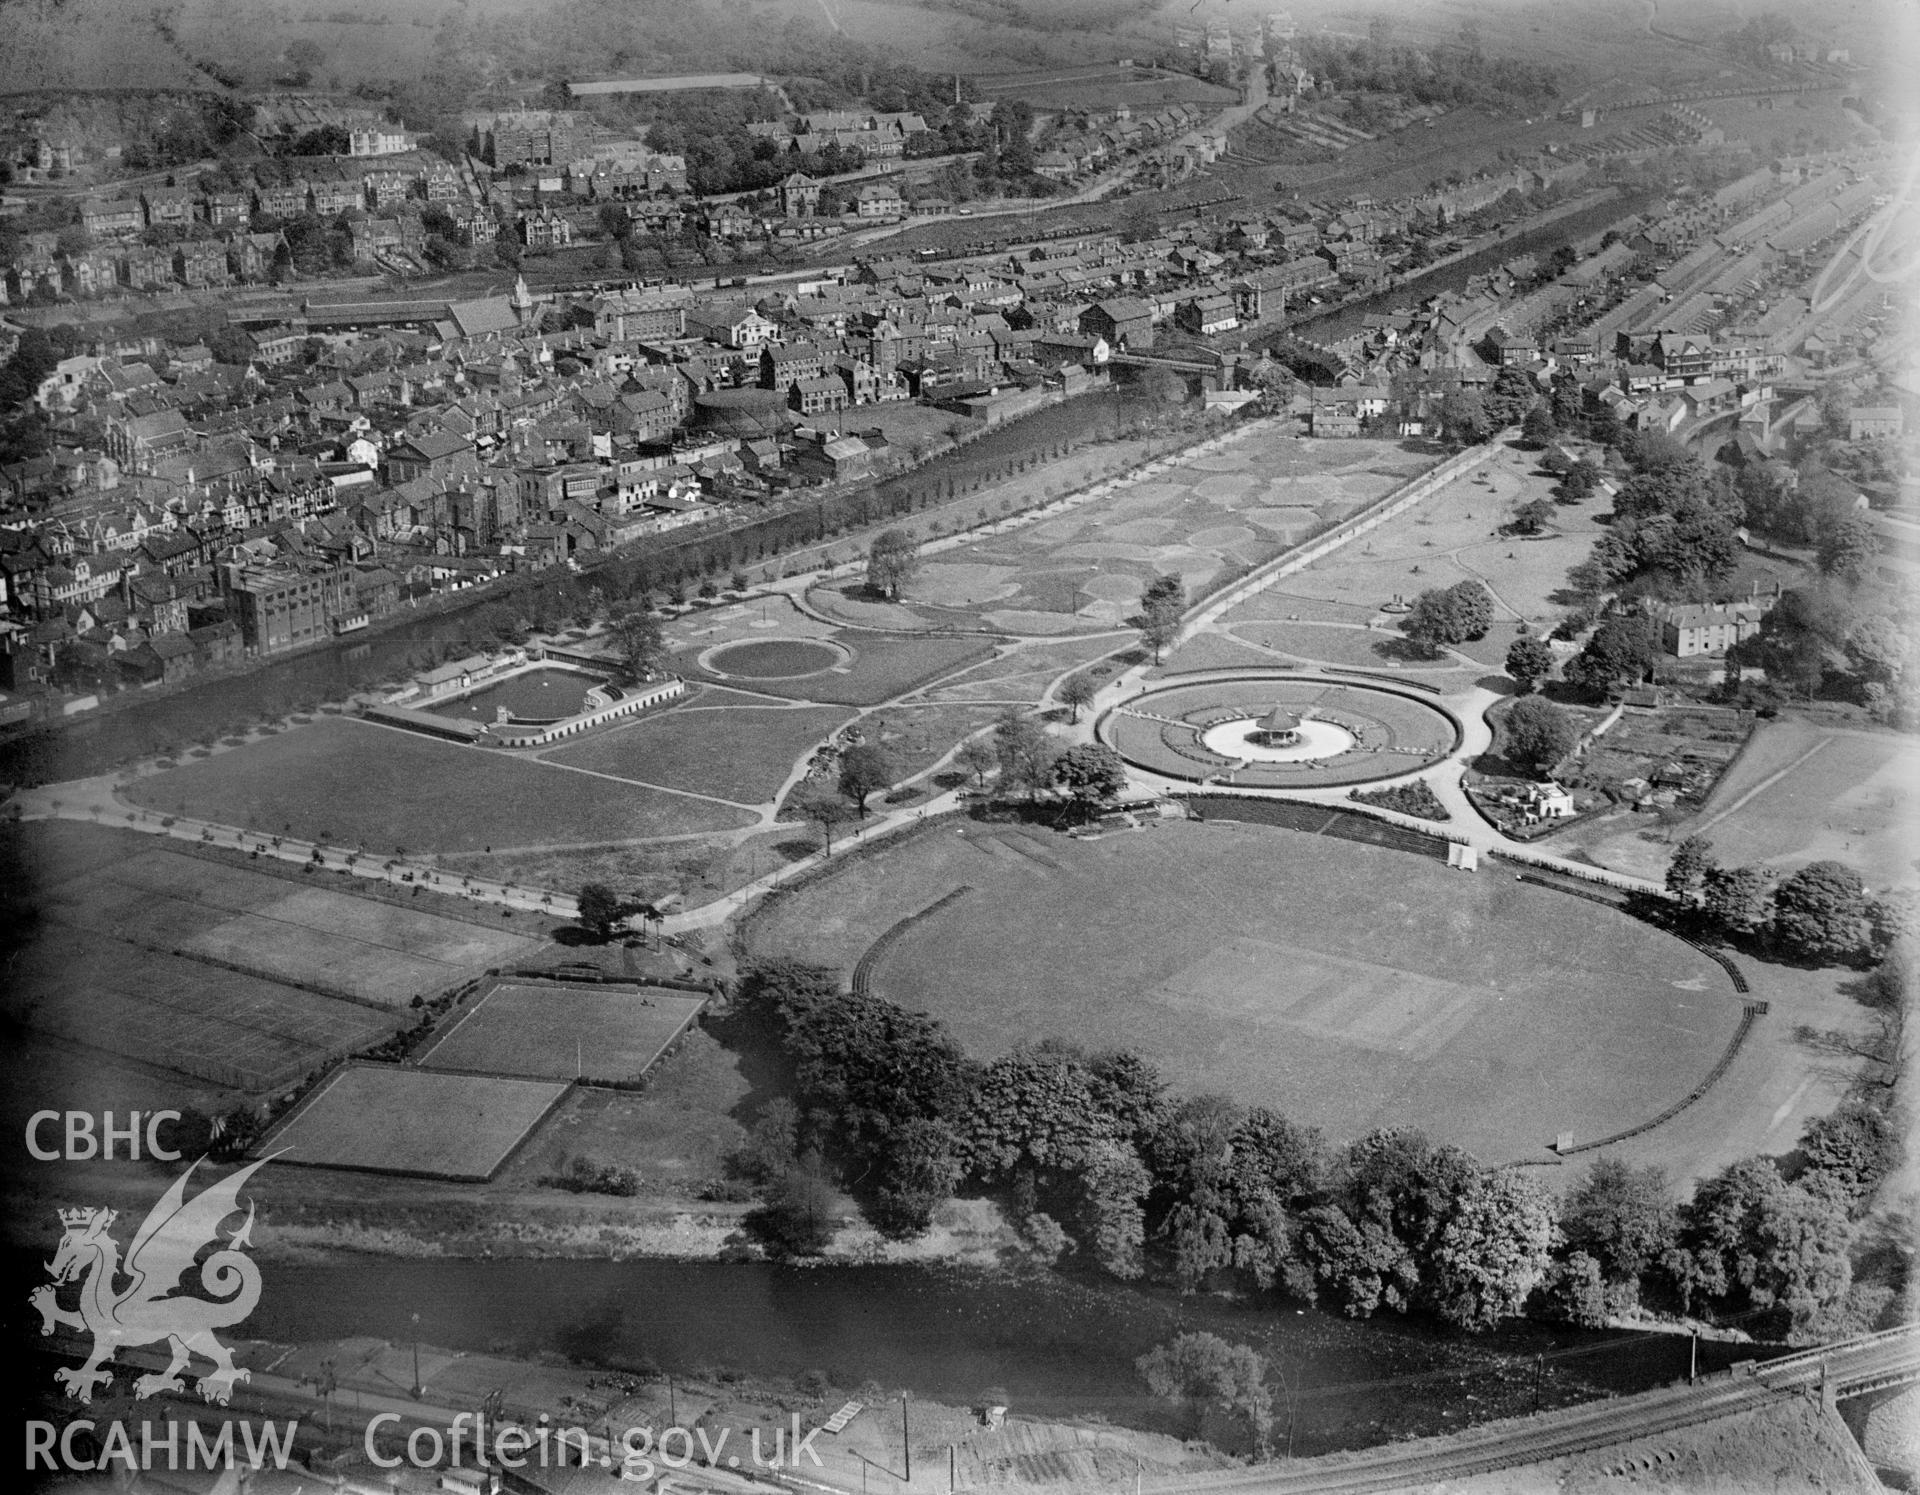 View of Ynysangharad Park and swimming pool, oblique aerial view. 5?x4? black and white glass plate negative.